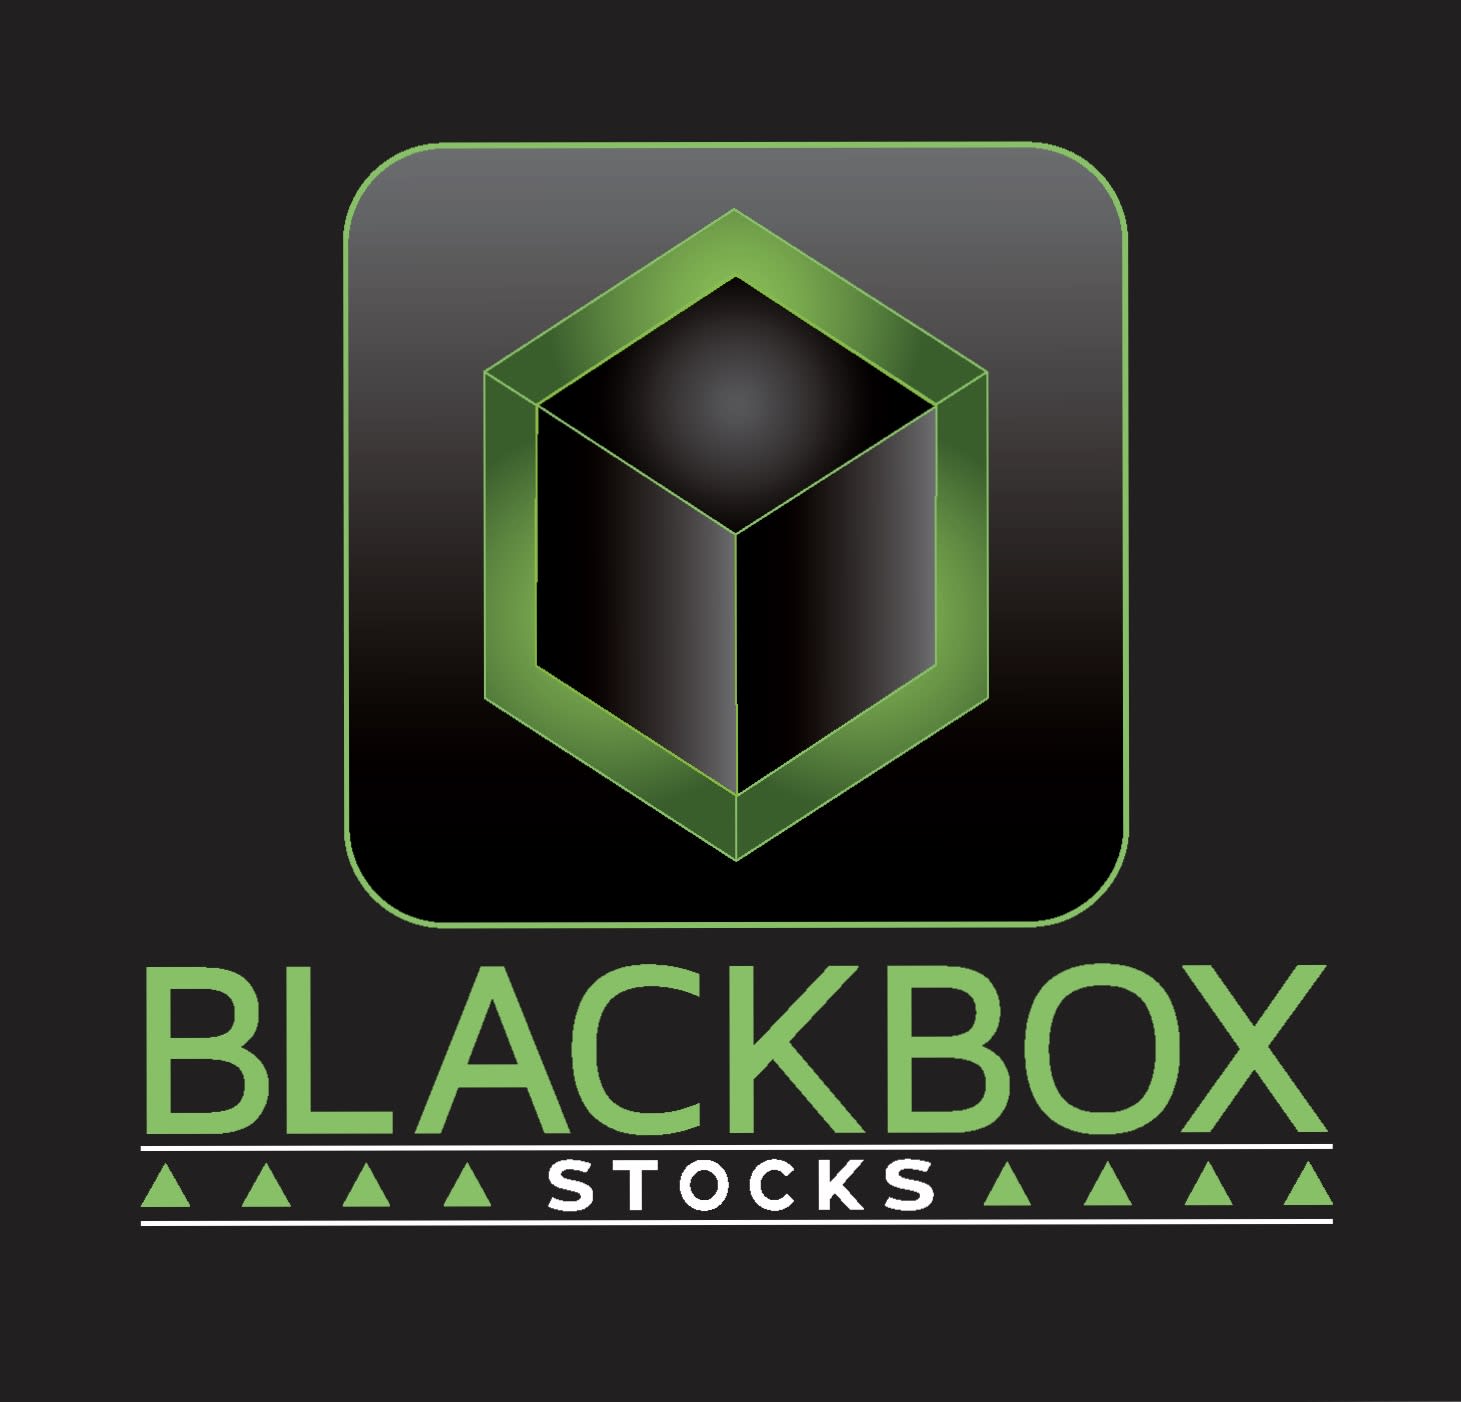 Blackboxstocks Follows E*Trade Integration News By Launching Its iOS And Android App...And It Can Be A Subscriber-Growth Game Changer ($BLBX)